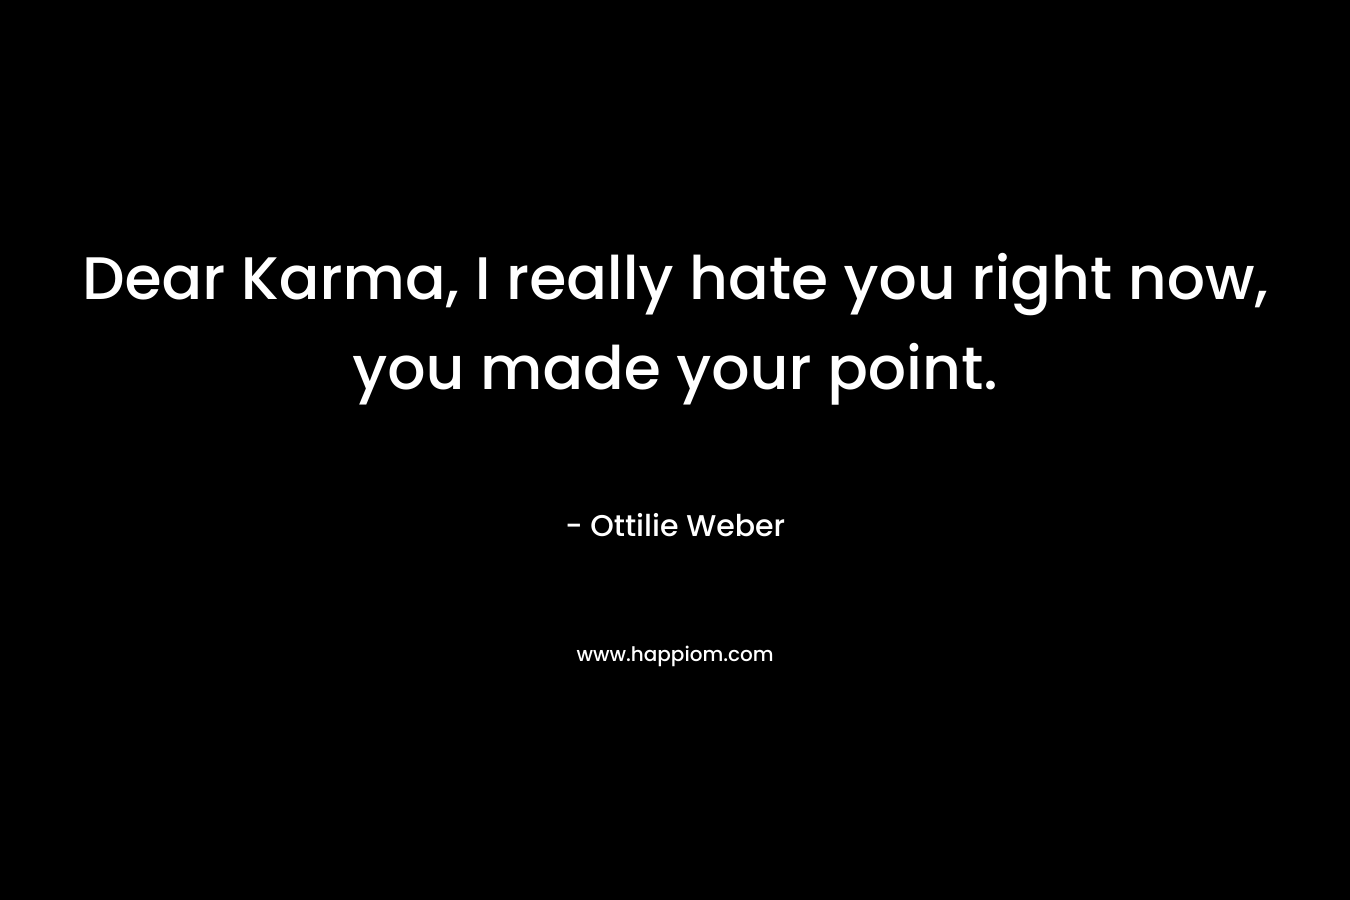 Dear Karma, I really hate you right now, you made your point.